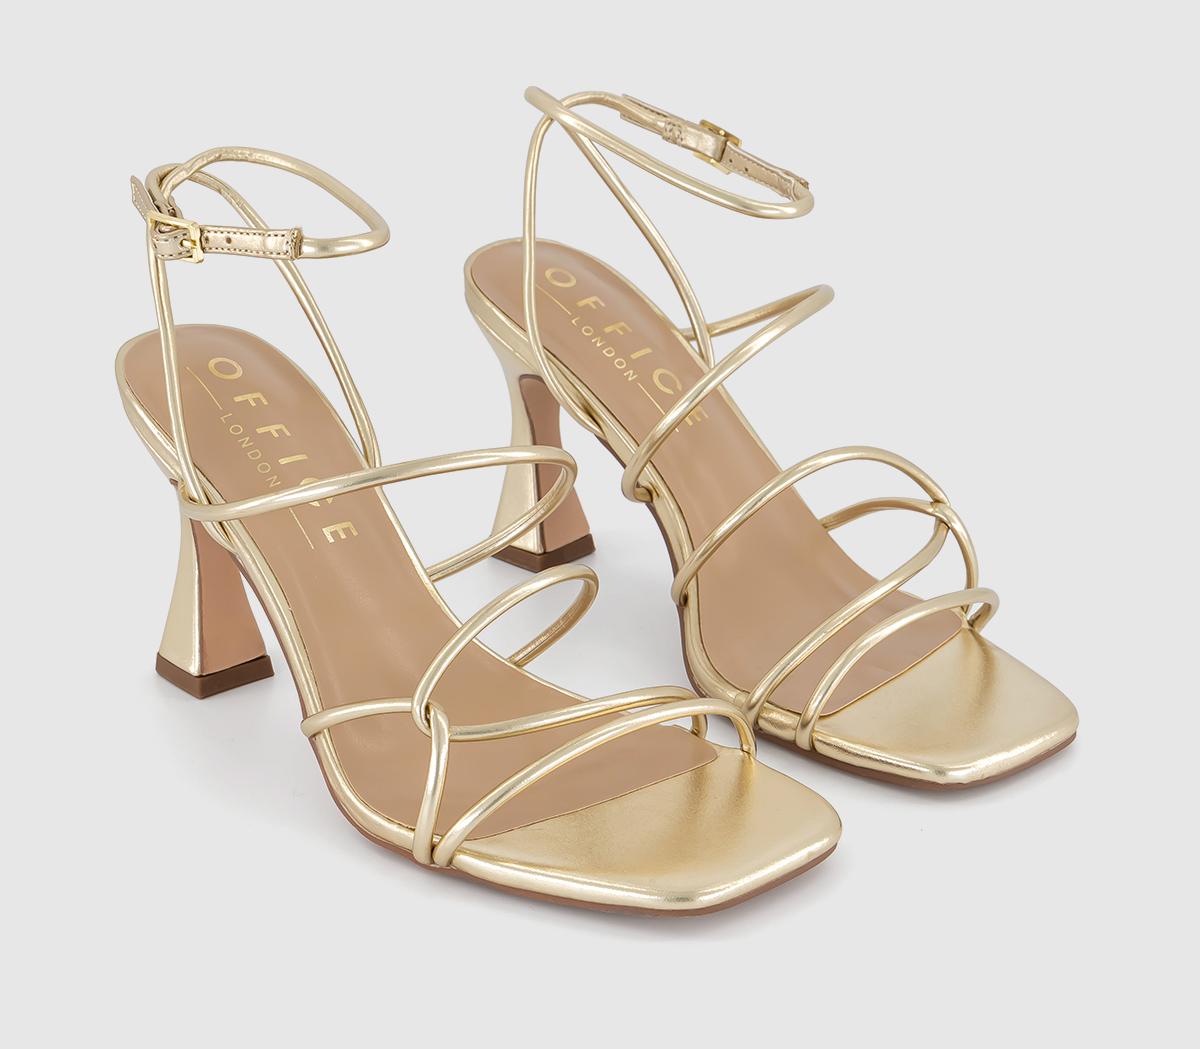 OFFICE Womens Million Dollar Strappy Sandals Gold, 4